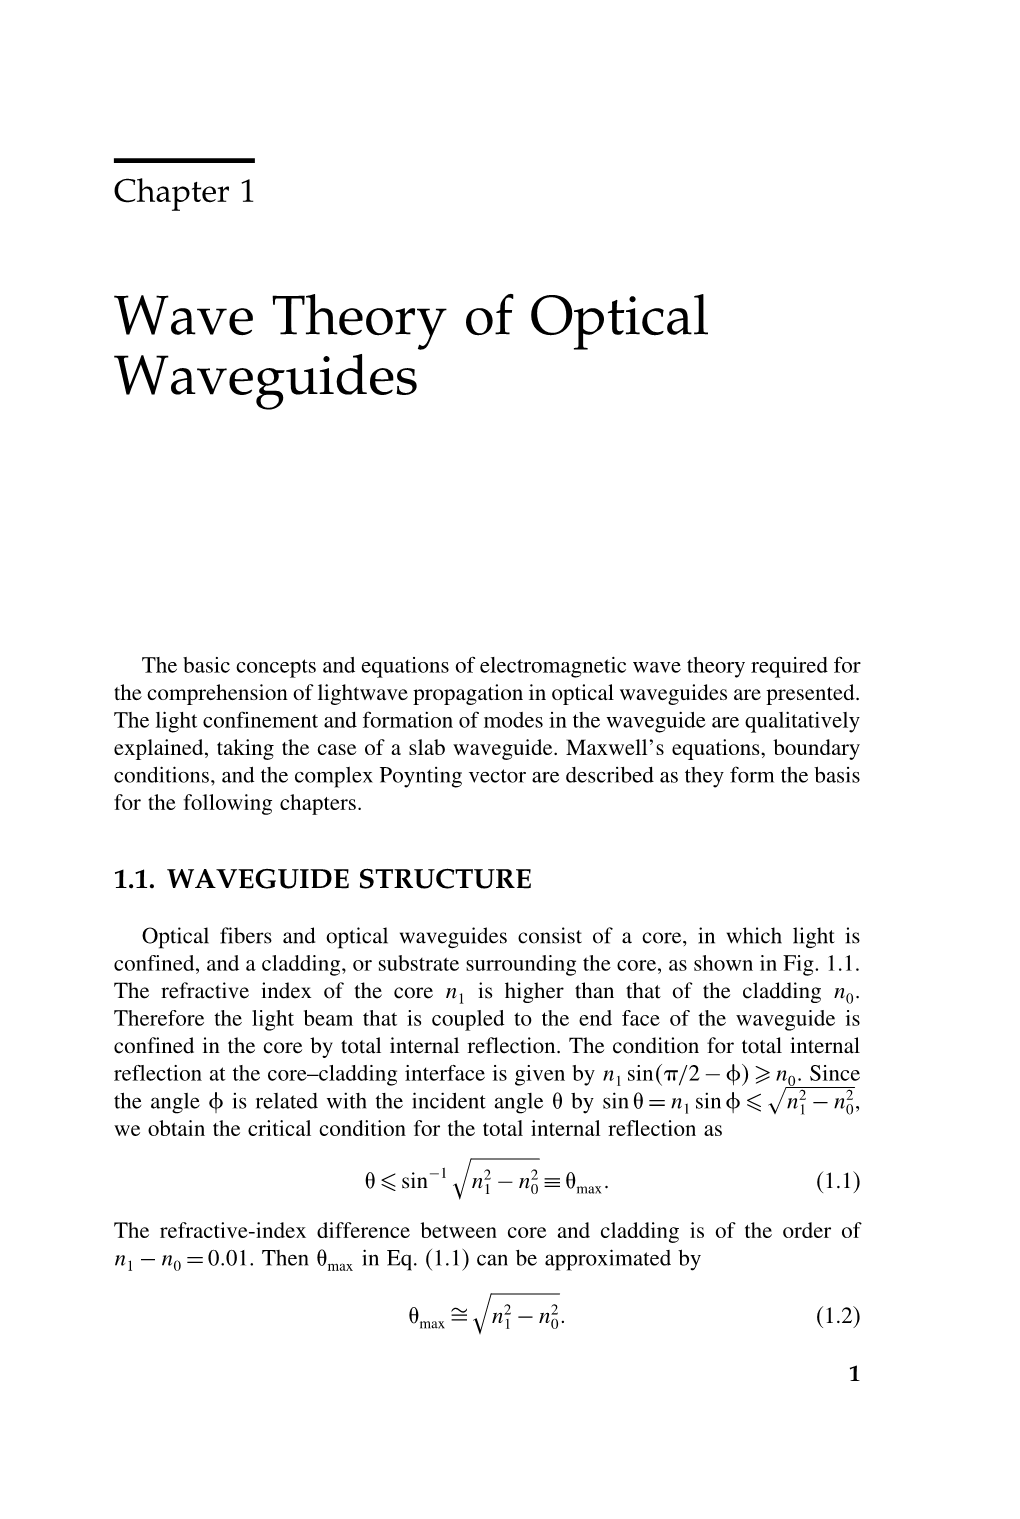 Wave Theory of Optical Waveguides